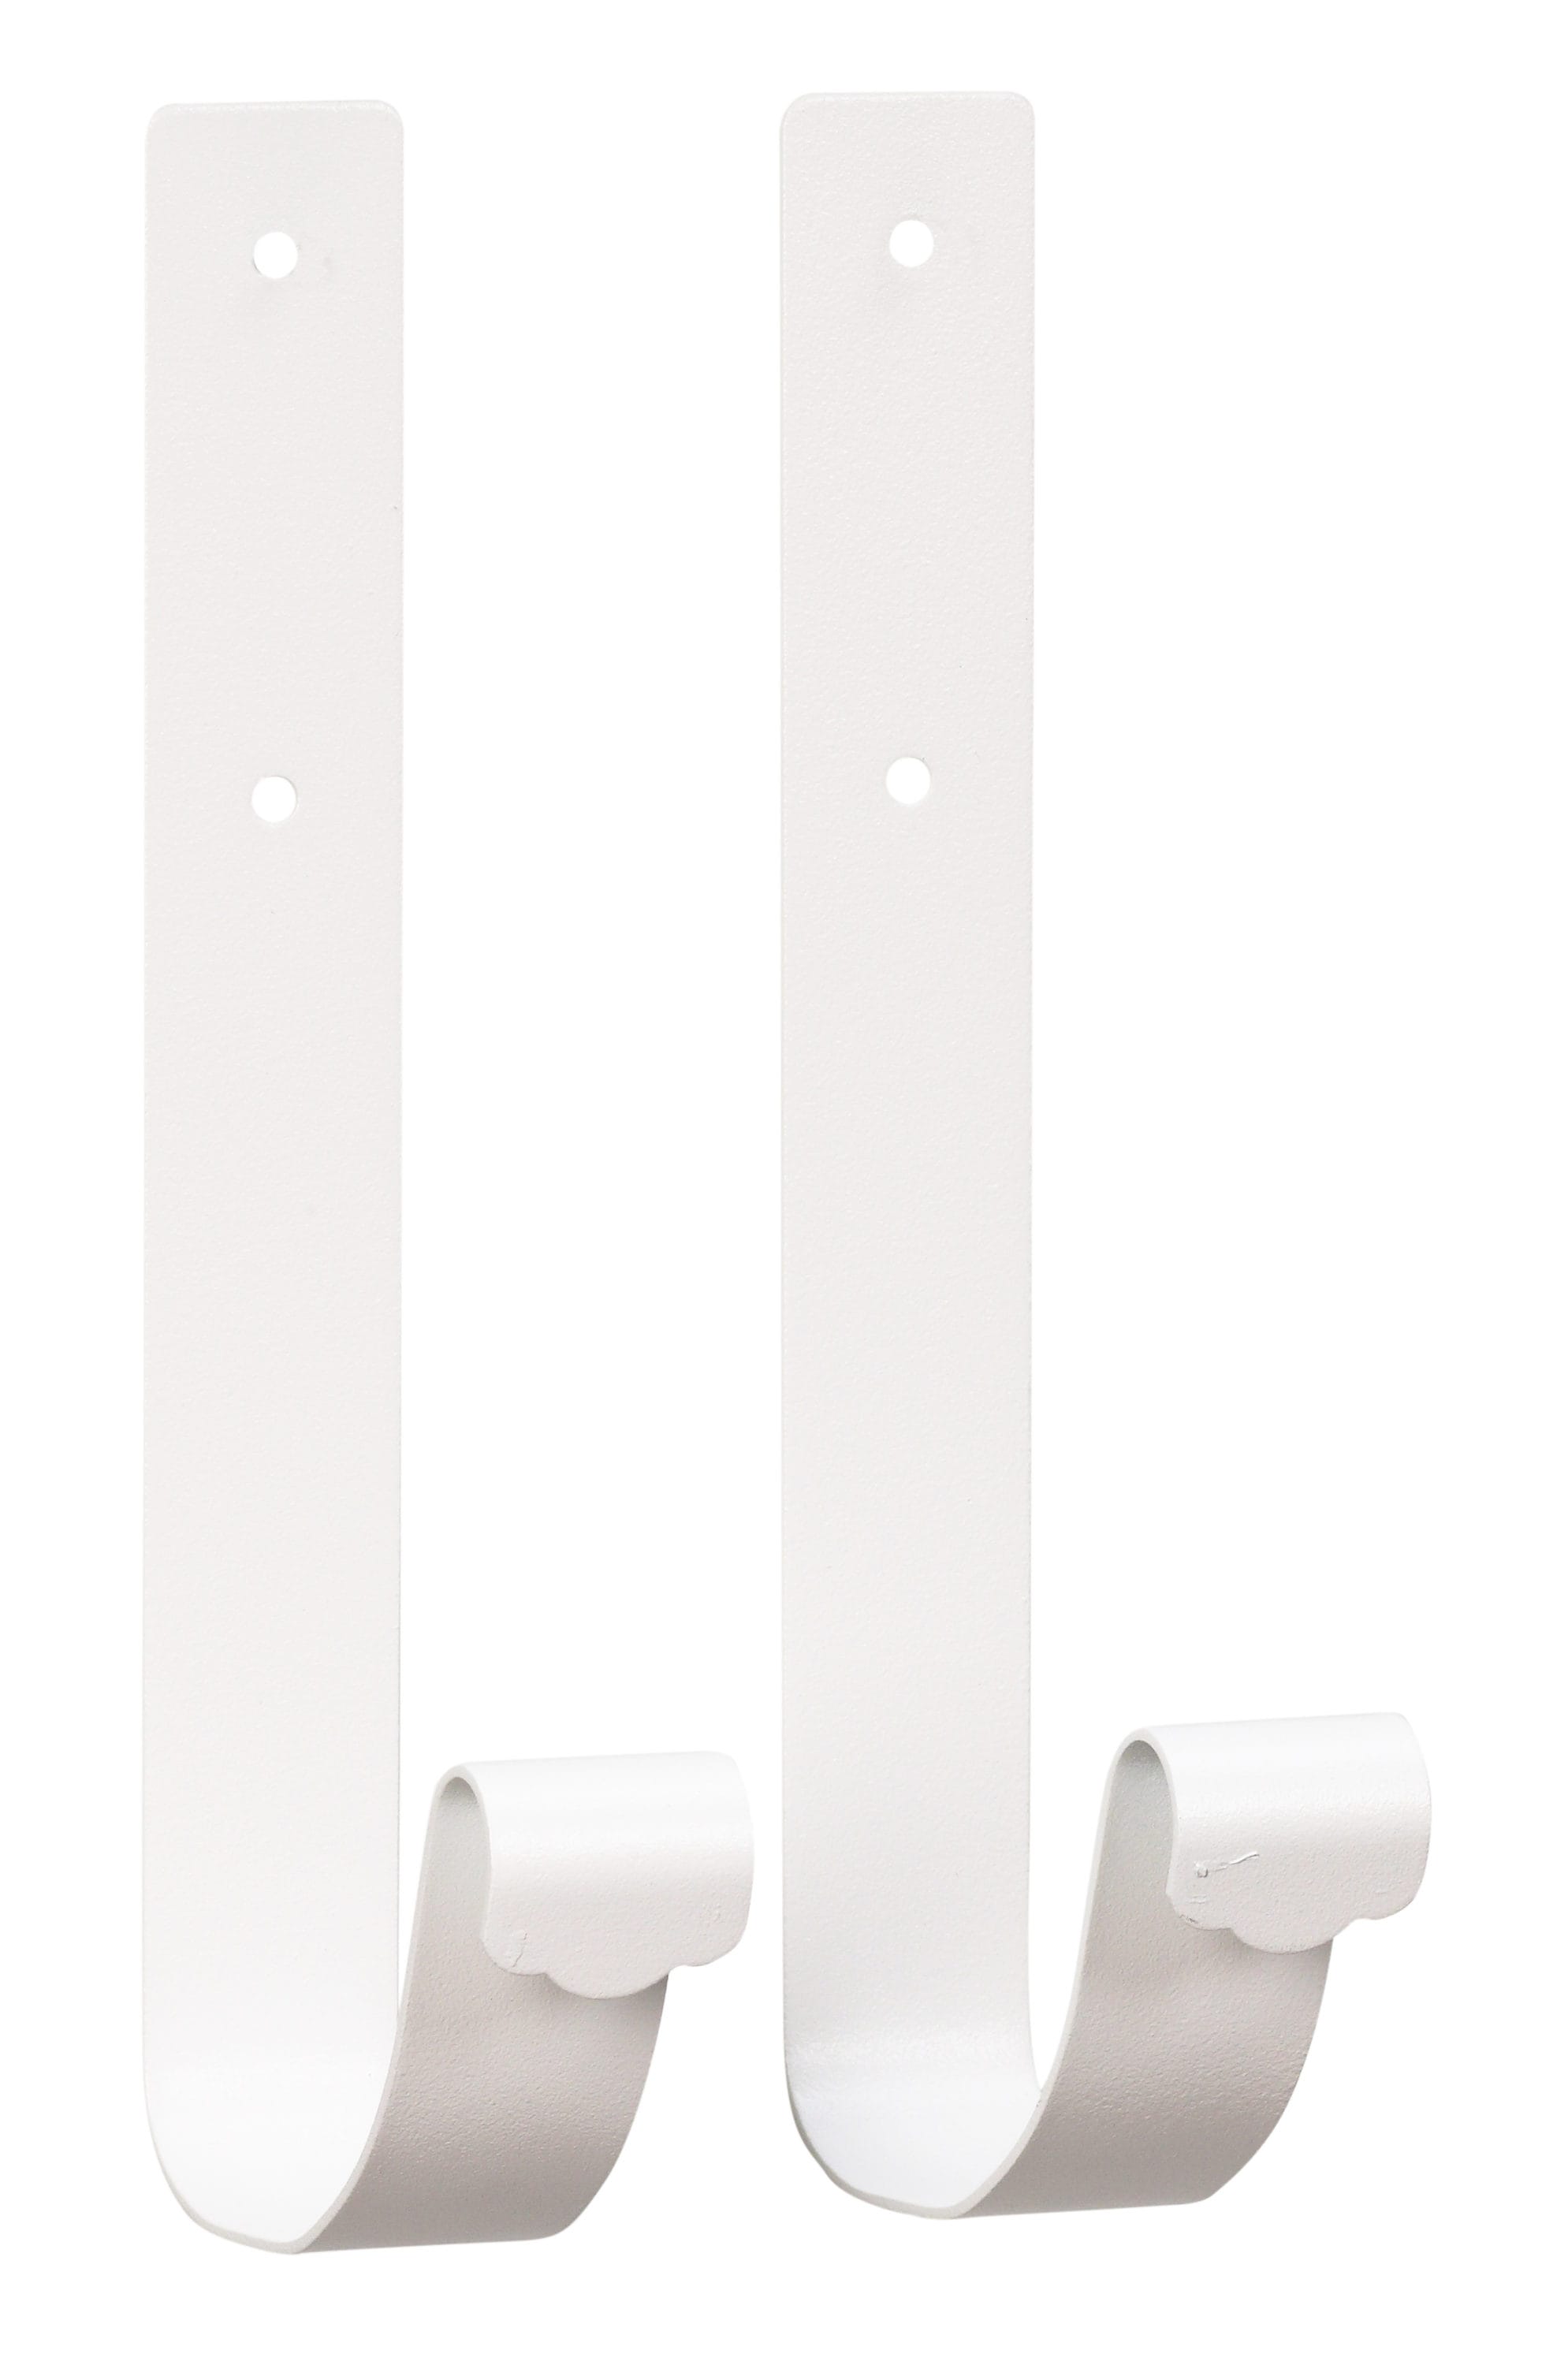 PRO-DF White Steel Newspaper Holder Hooks for Wall Mount Mailbox - 2 Pack,  Mounting Hardware Included - High Quality Galvanized Steel, Maintenance